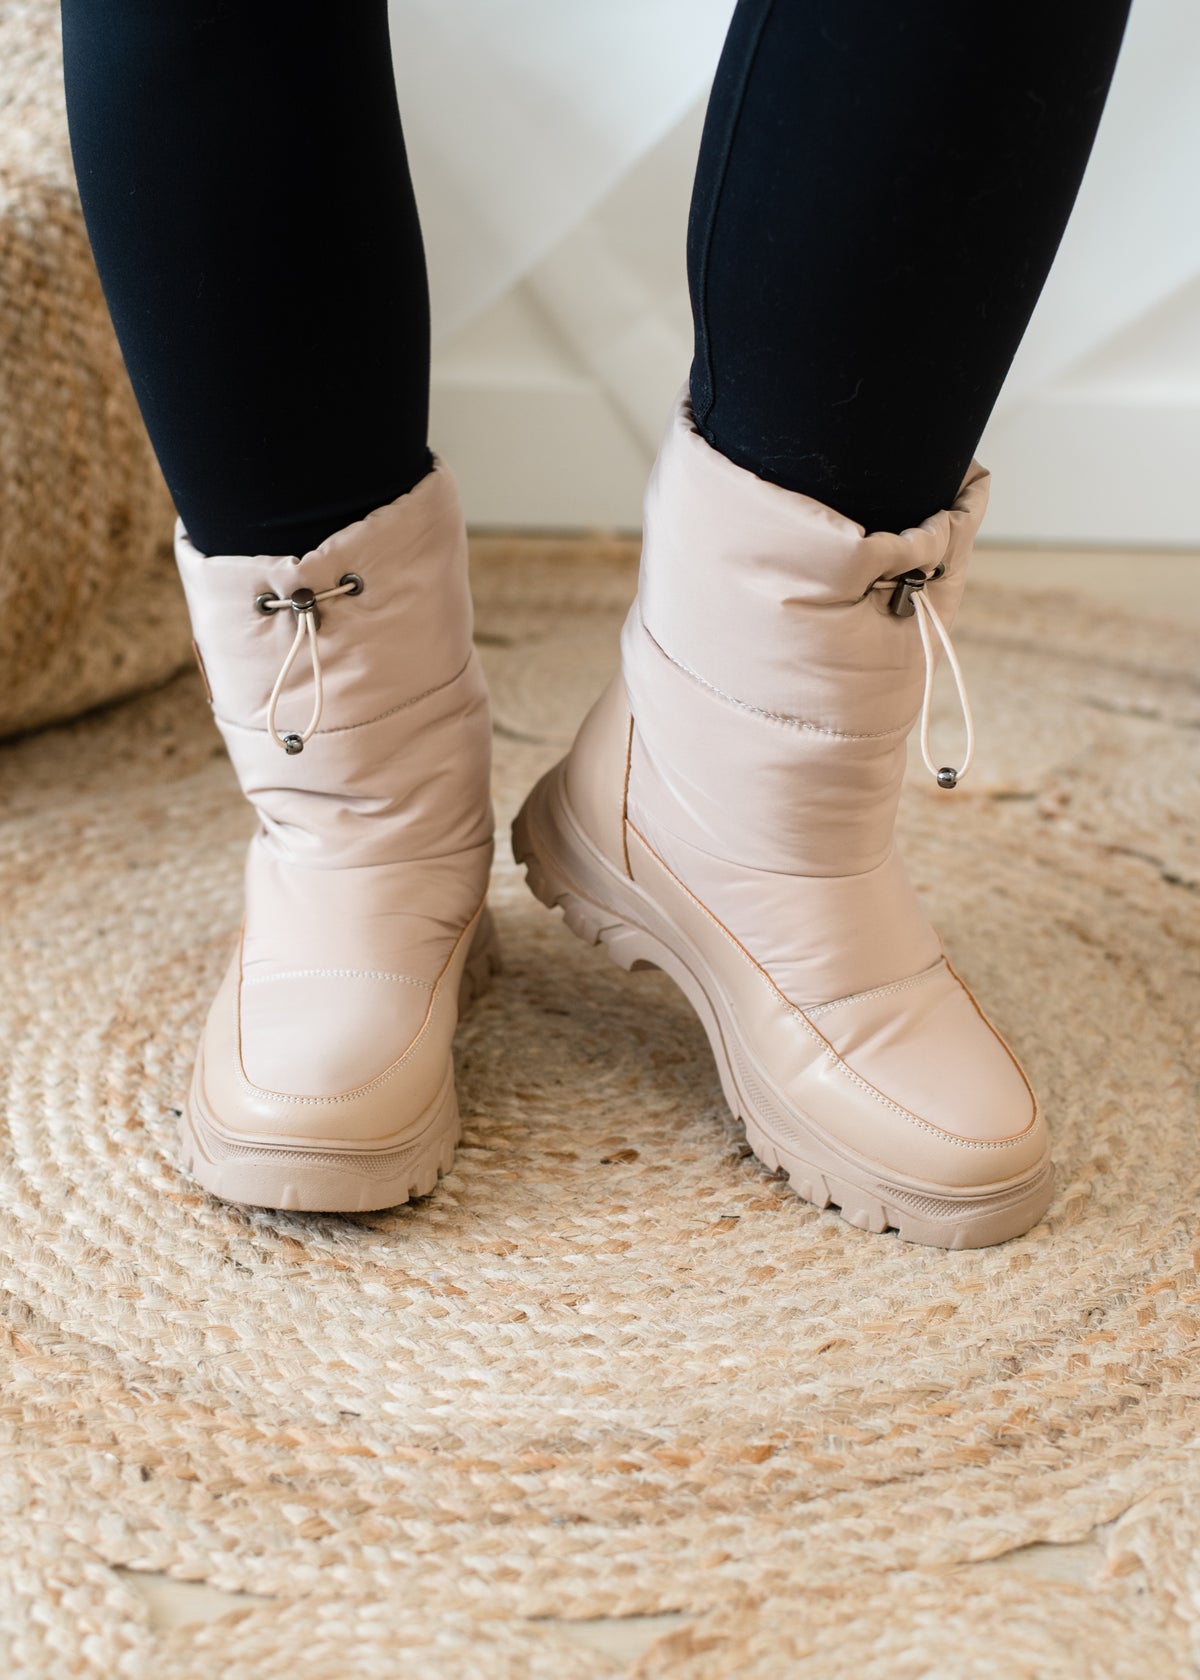 The Bailey Boots